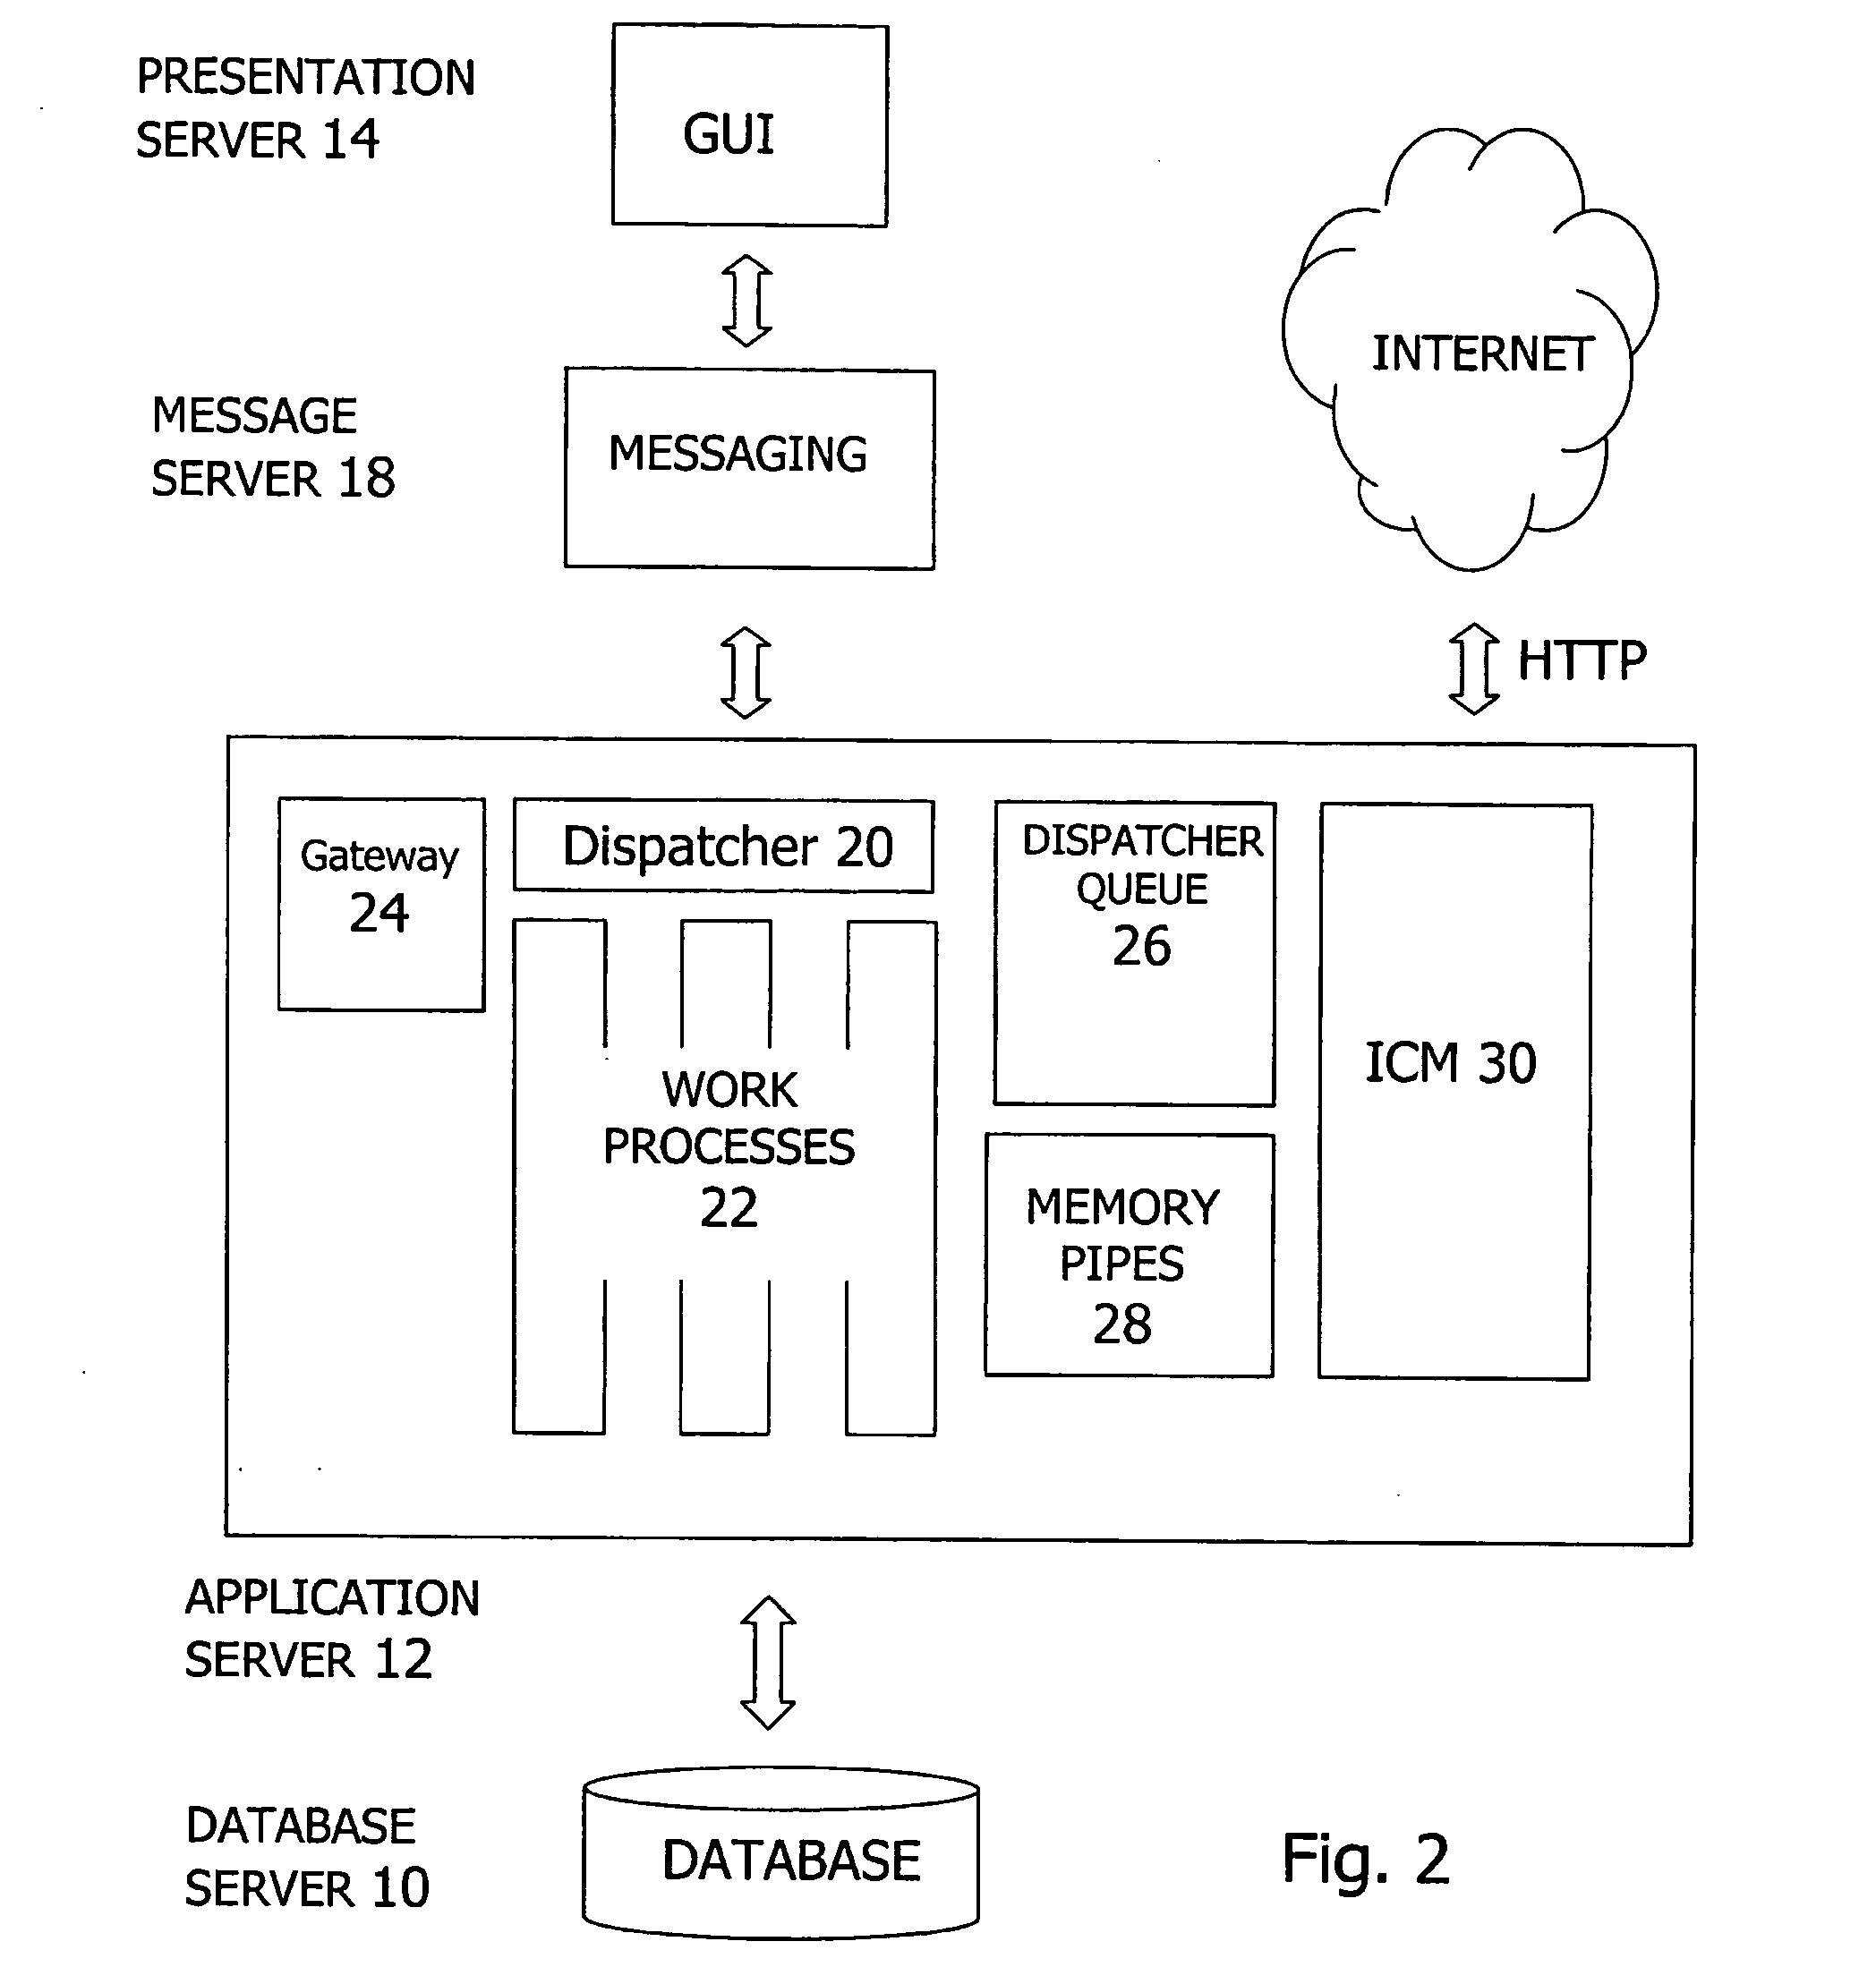 Systems, methods, and articles of manufacture for handling hierarchical application data